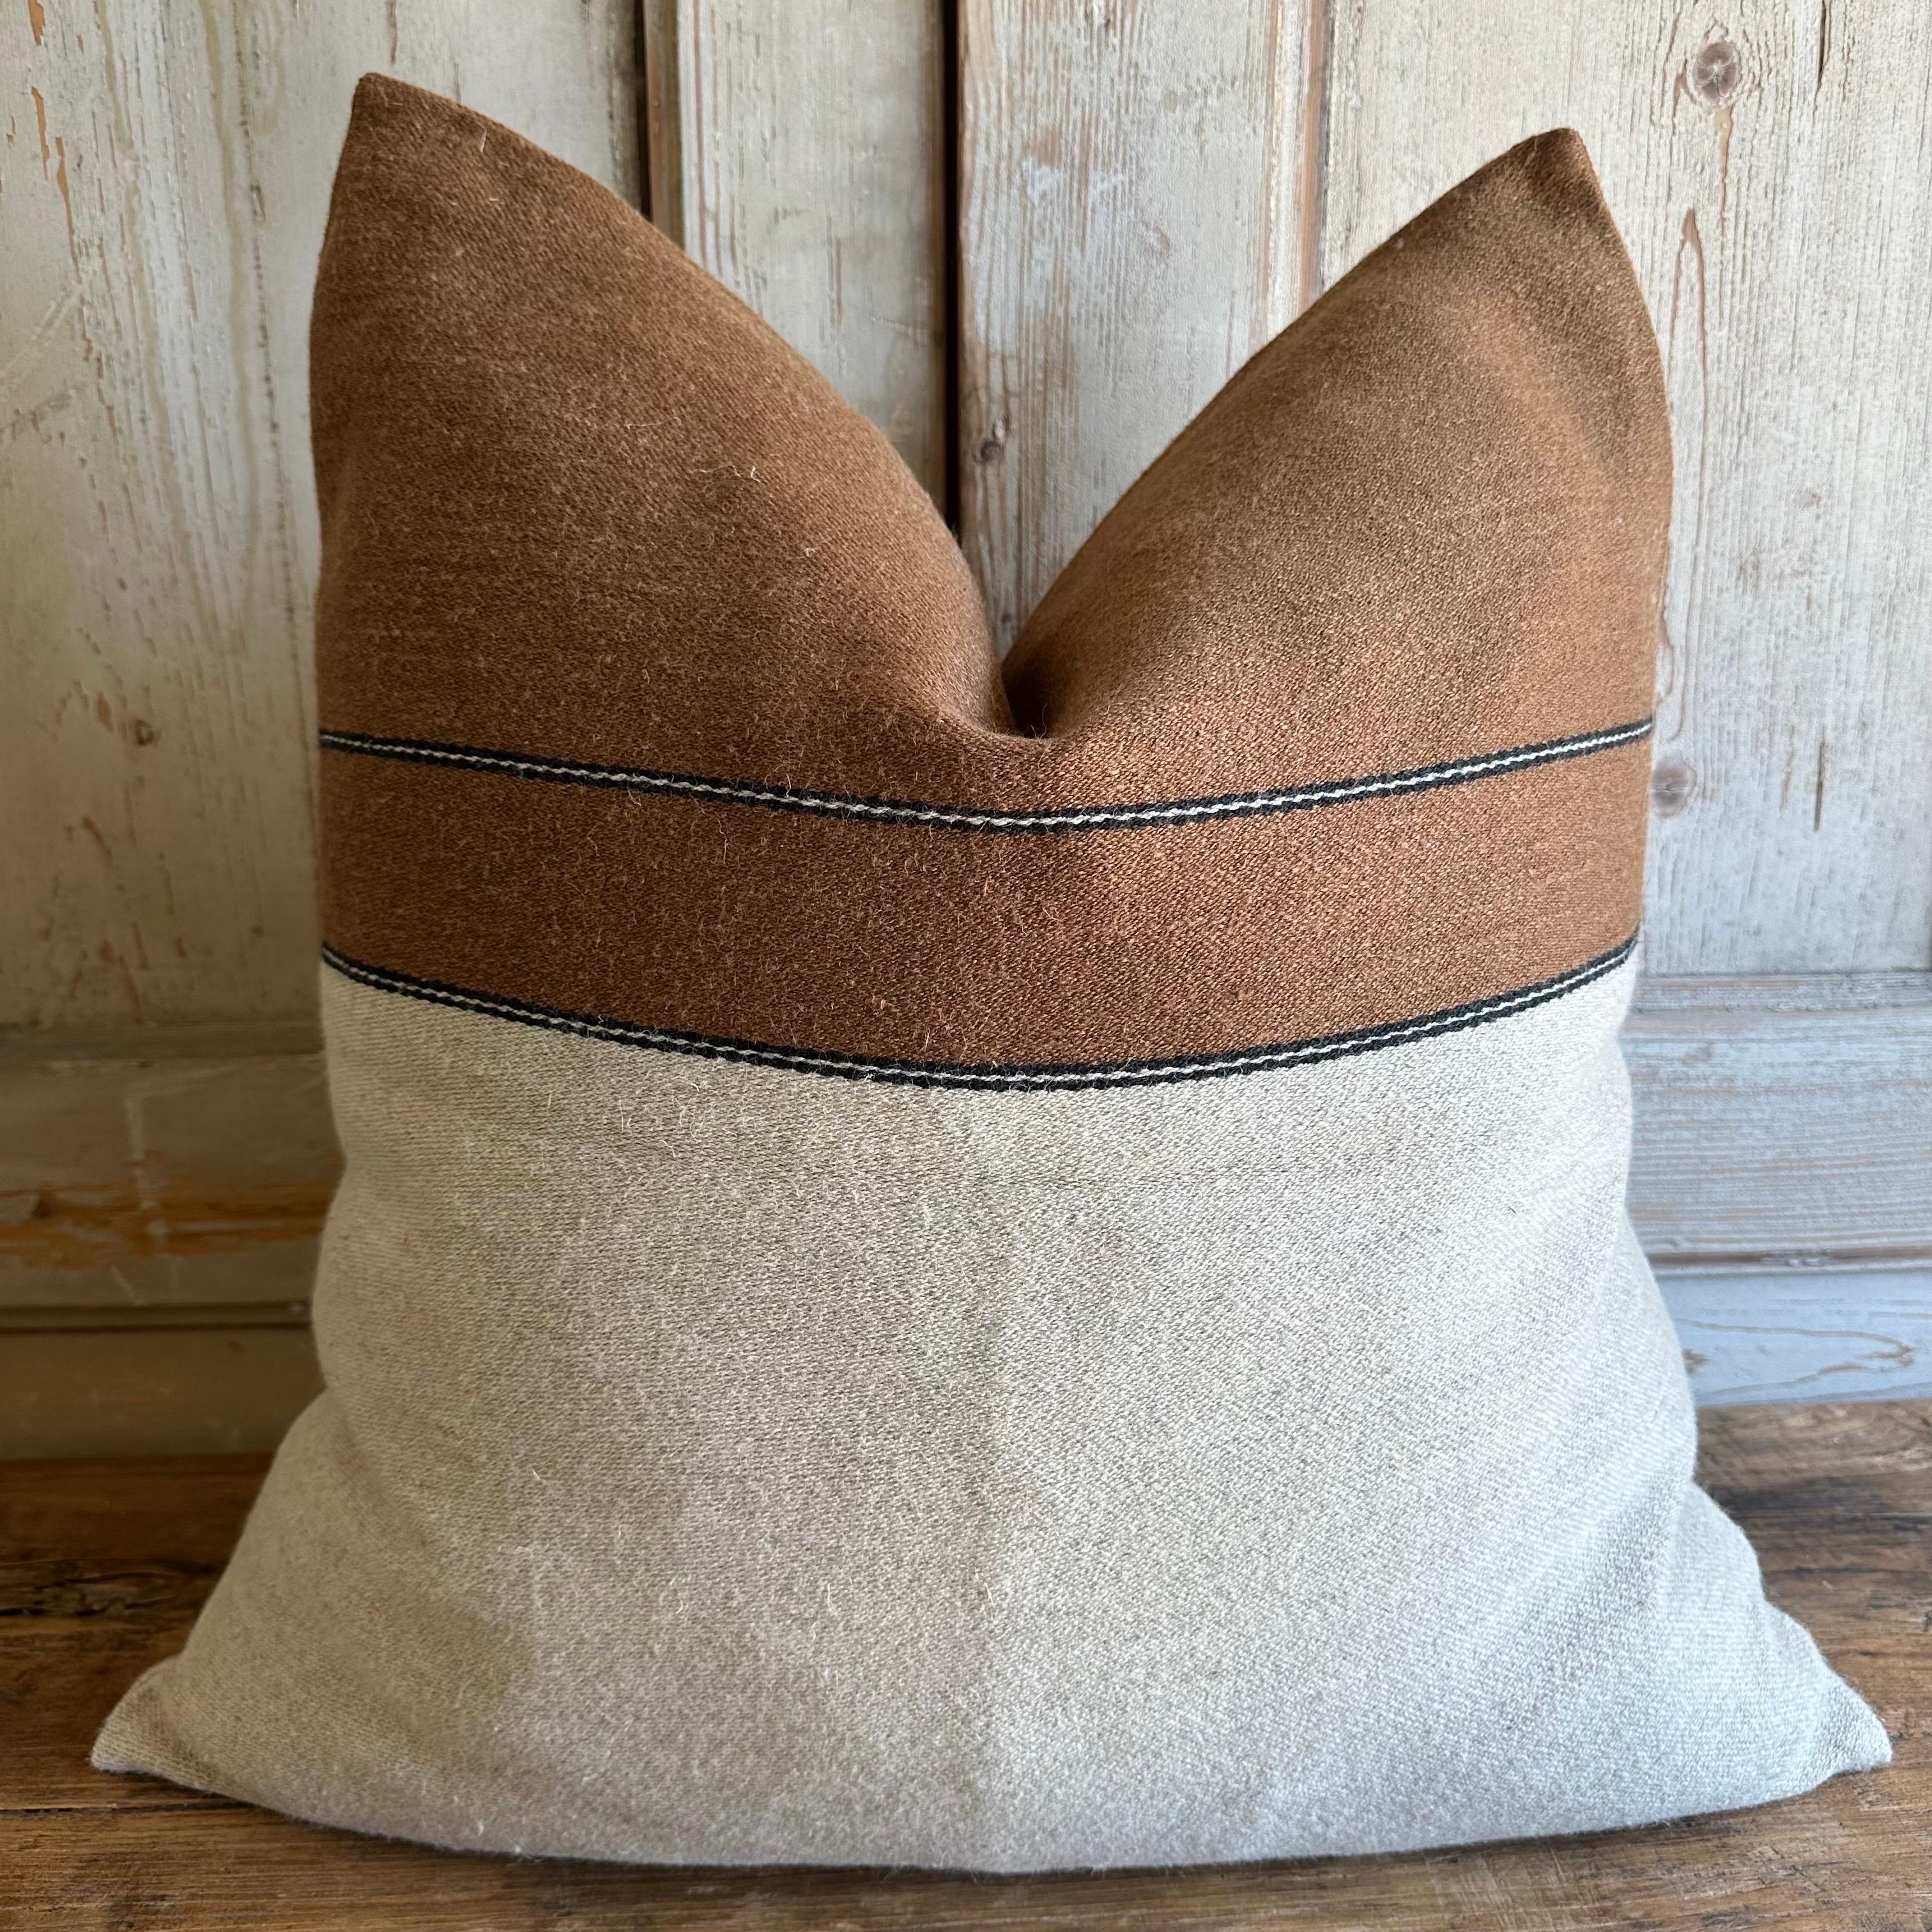 A natural ground finished with beeswax brown, black and natural stripes.
70% linen - 30% wool
Washed finish
Size: 25x25 (cover only)
18 oz/yd² - 610 g/m²
Please wash at max. 30°C/86°F on a wool or hand wash program. Unfold the throw completely